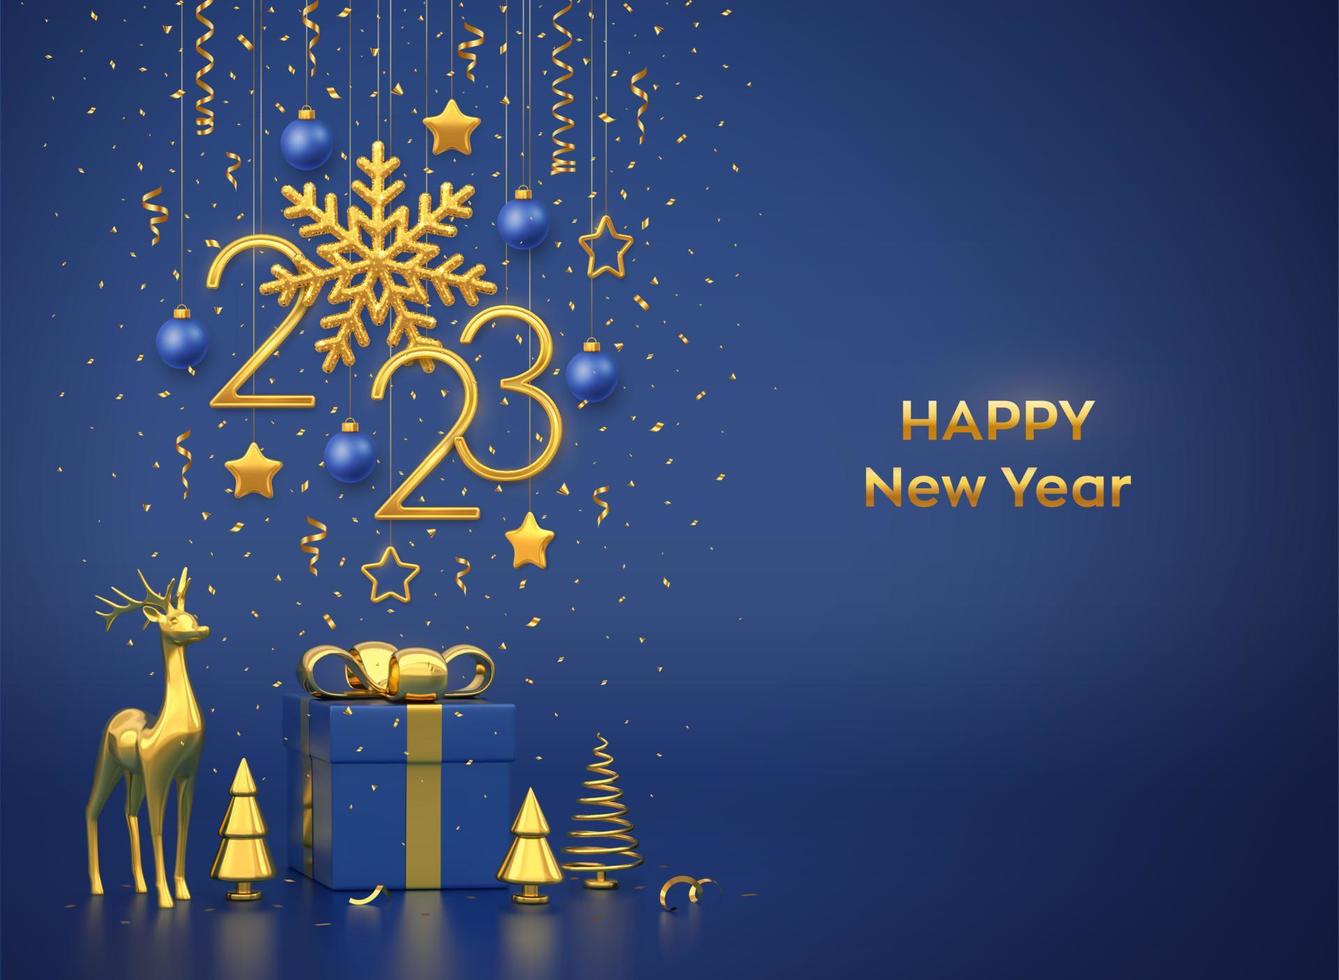 Happy New 2023 Year. Hanging golden metallic numbers 2023 with snowflake, stars, balls on blue background. Gift box, gold deer and metallic pine or fir, cone shape spruce trees. Vector illustration.